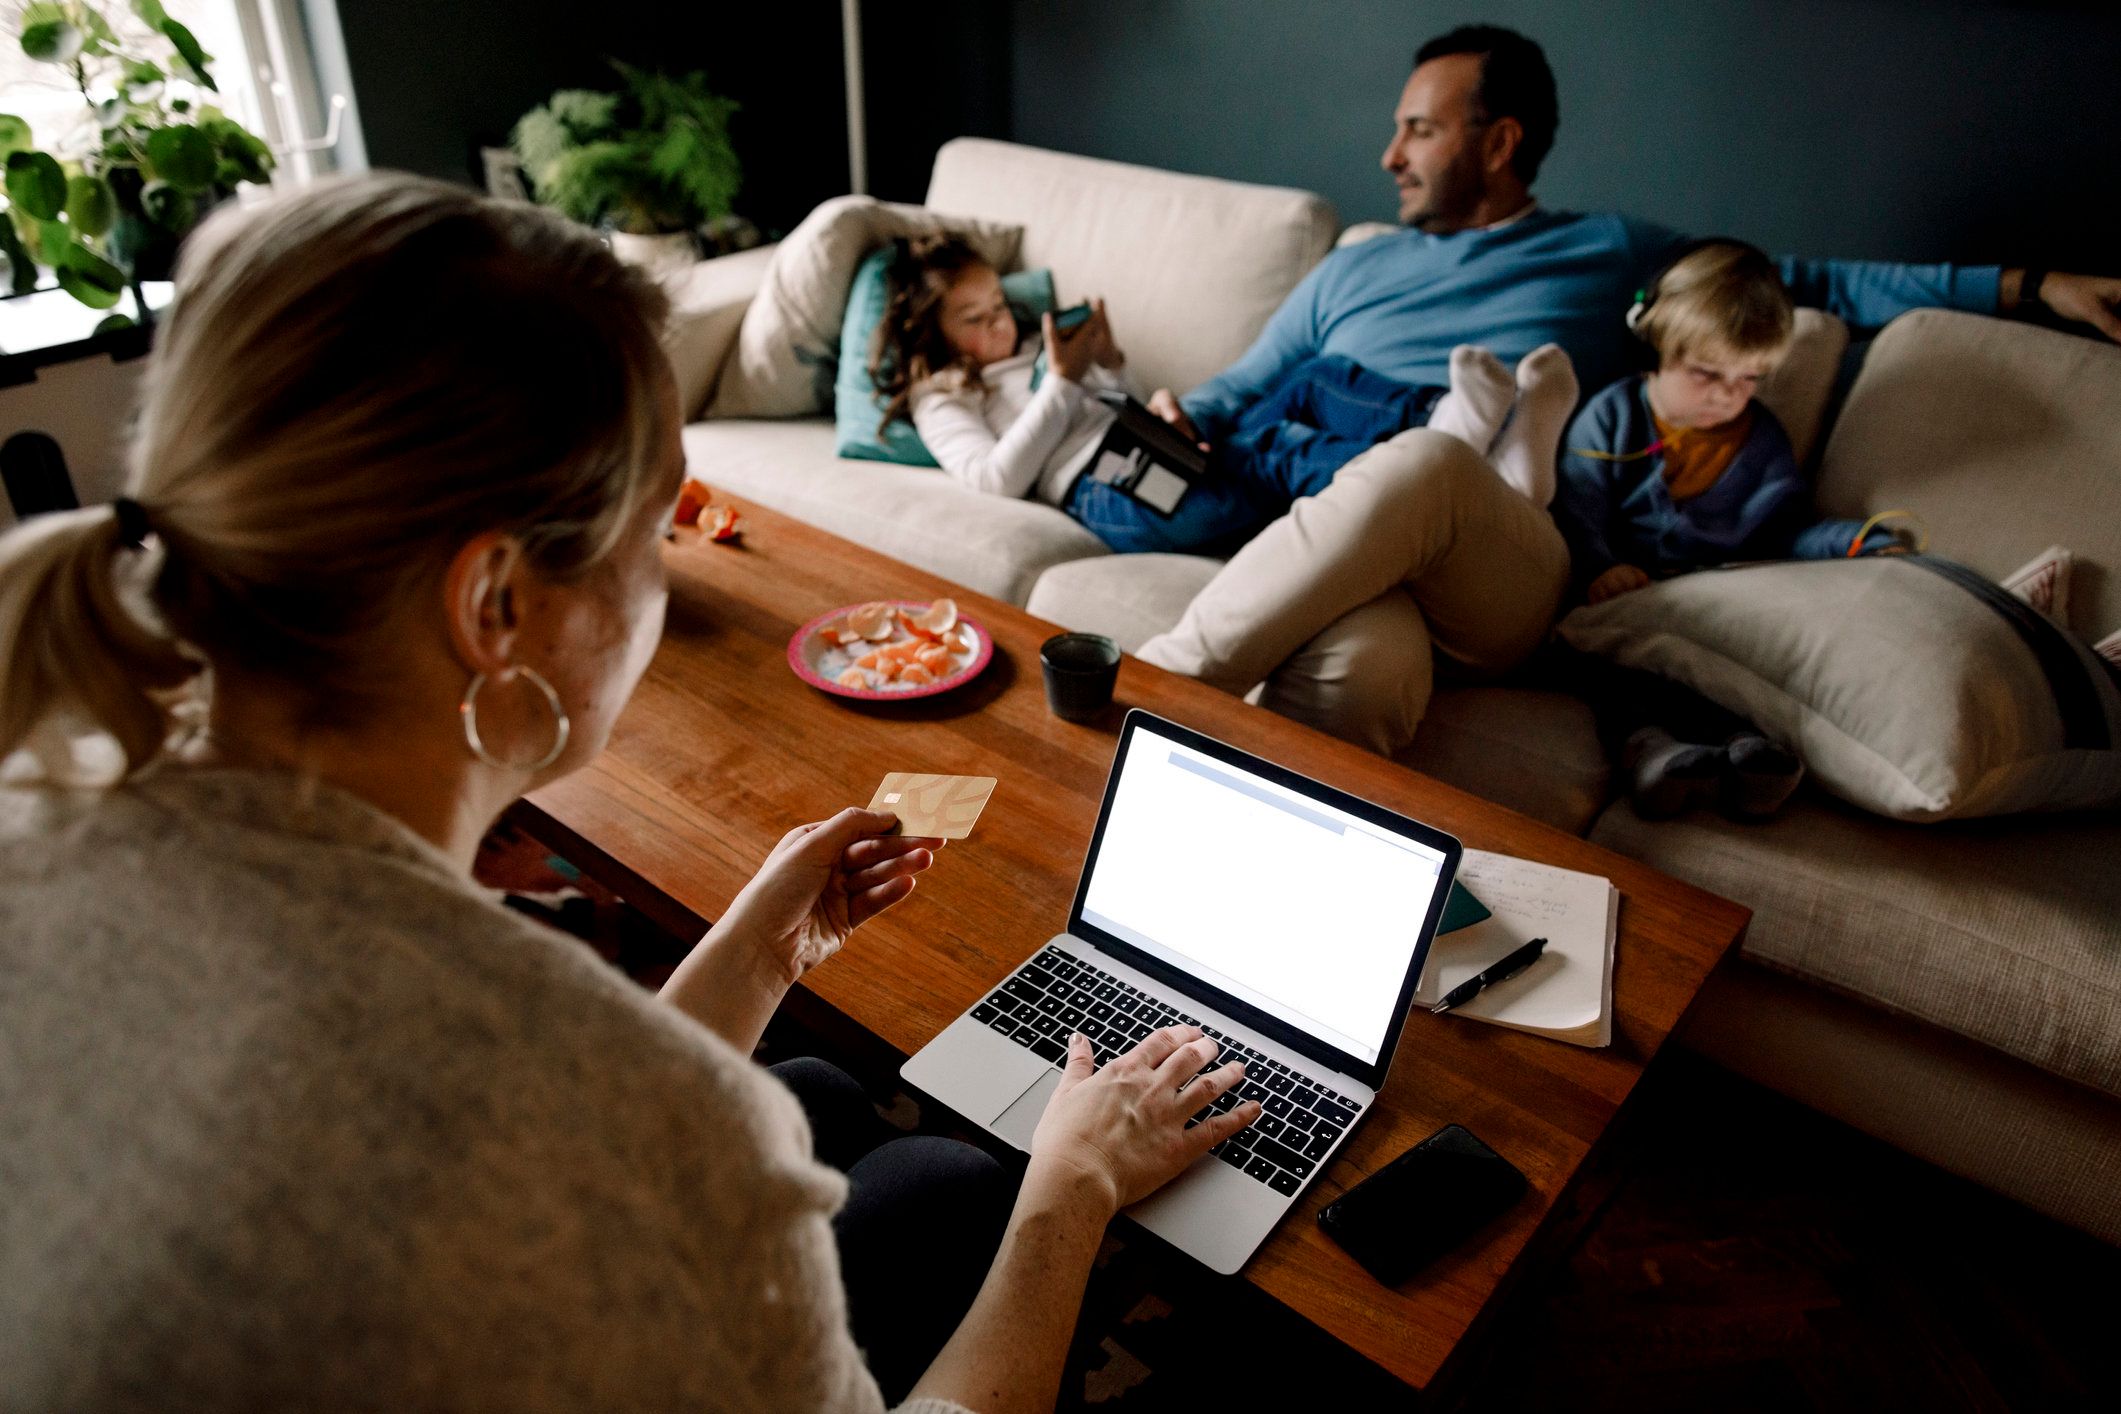 family in a sitting room while mother holds credit card and is on laptop